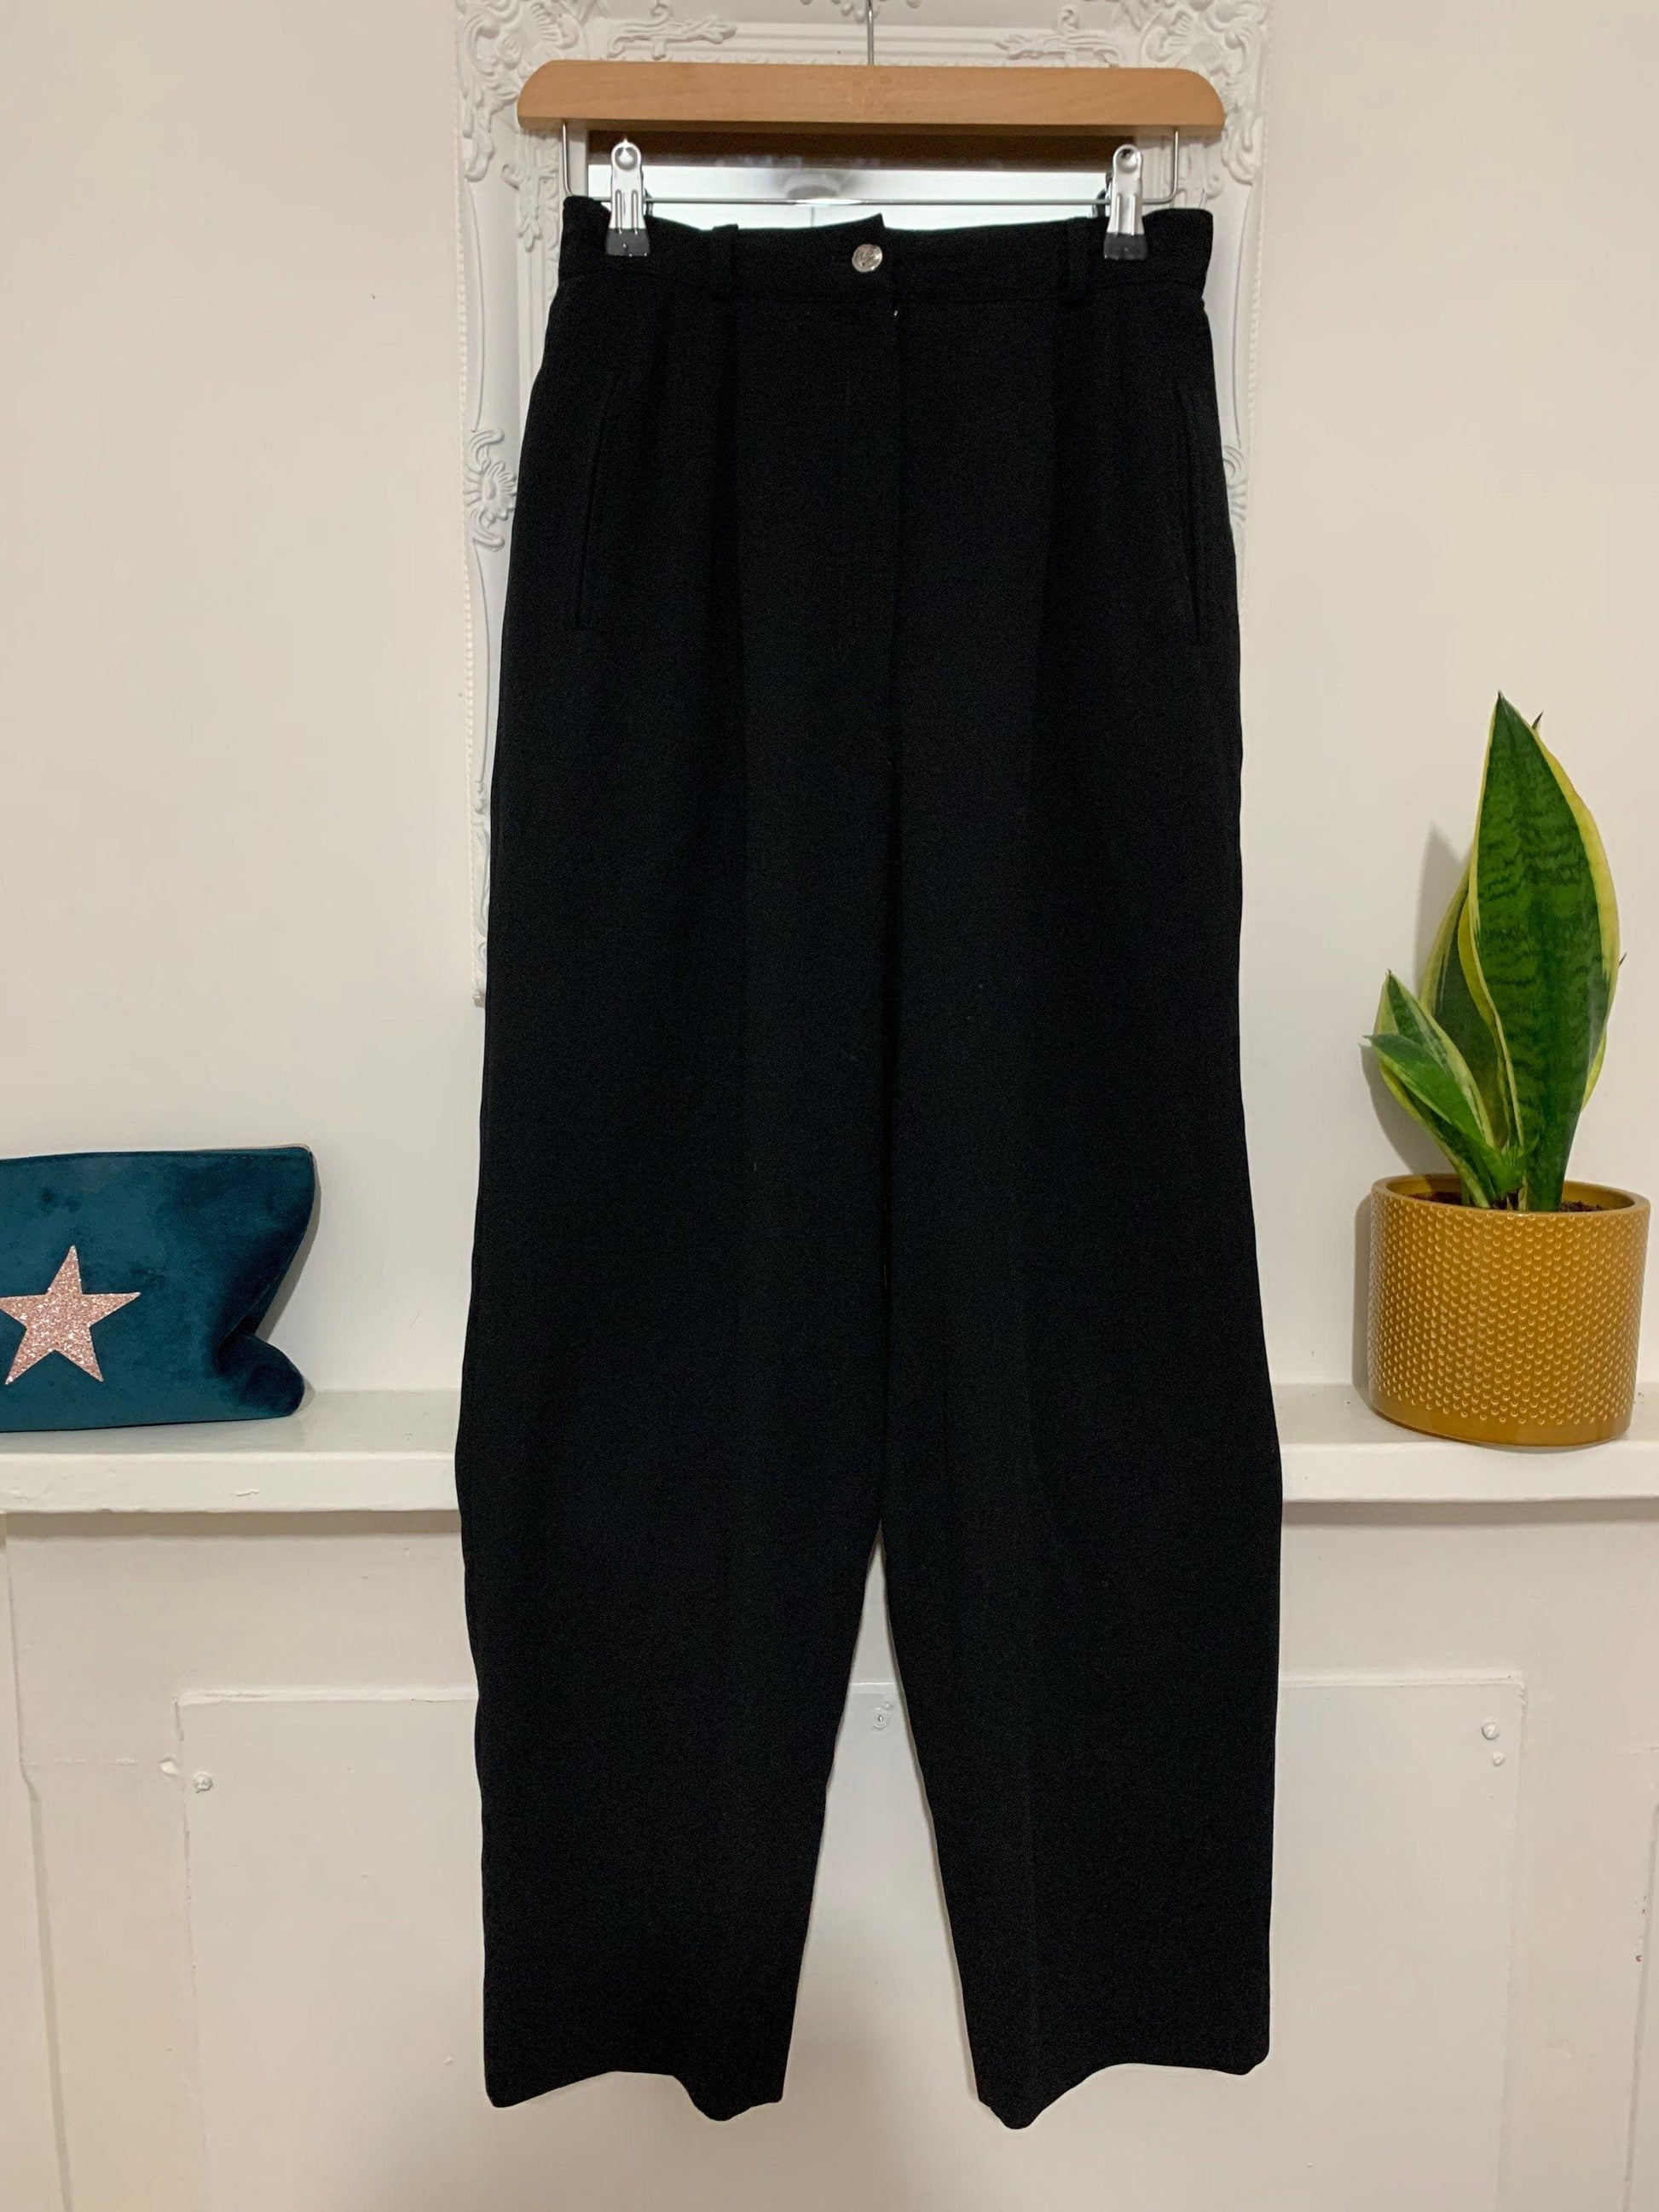 Vintage High waisted Trousers - Navy Blue - vintage clothing